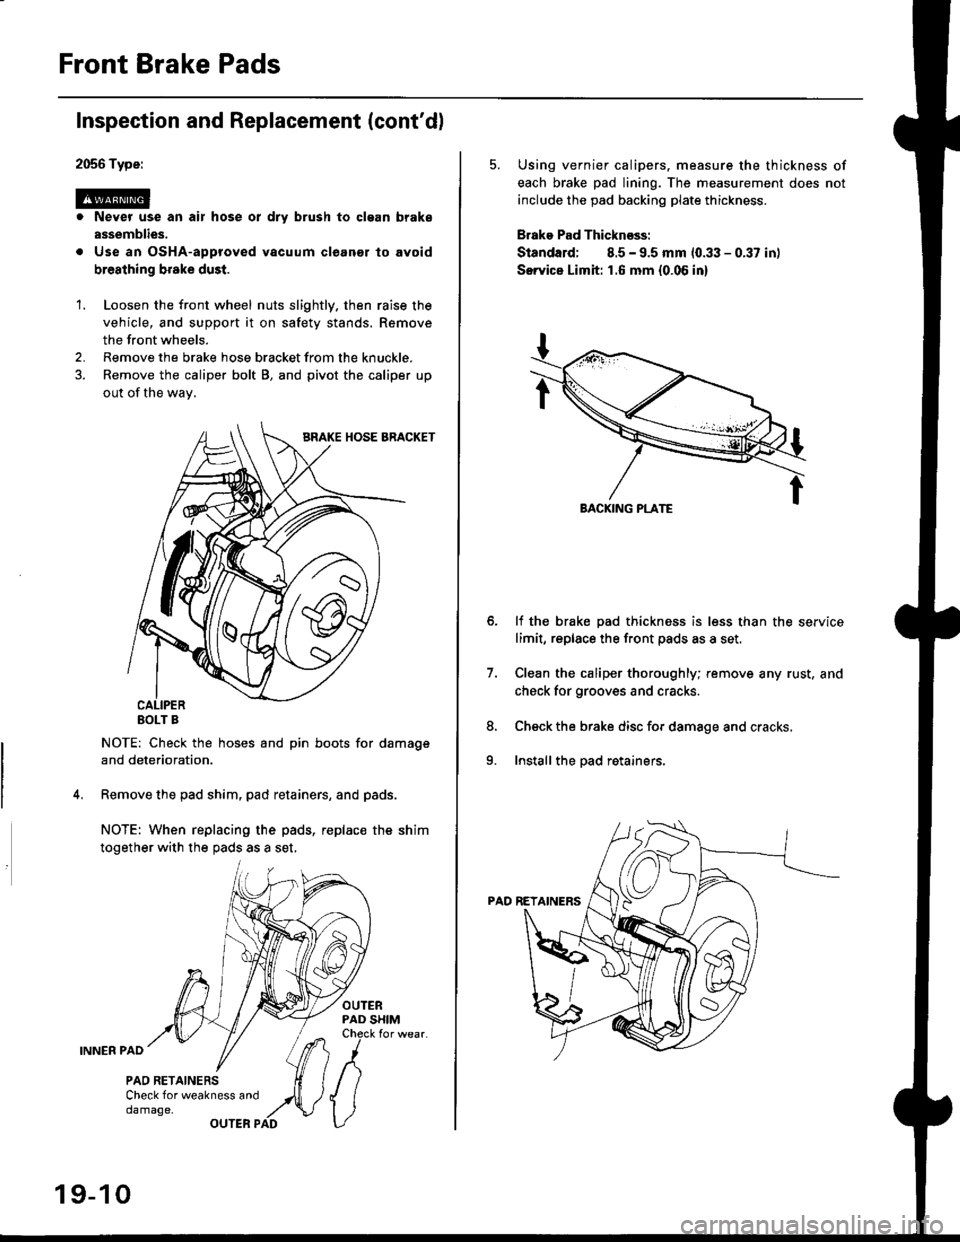 HONDA CIVIC 1997 6.G Workshop Manual Front Brake Pads
2056 Type:
@. Never use an air hose or dry brush to clgan brake
assemblies.
. Use an OsHA-approved vacuum cleanor lo avoid
breathing broke dust.
Inspection and Replacement (contdl
1.